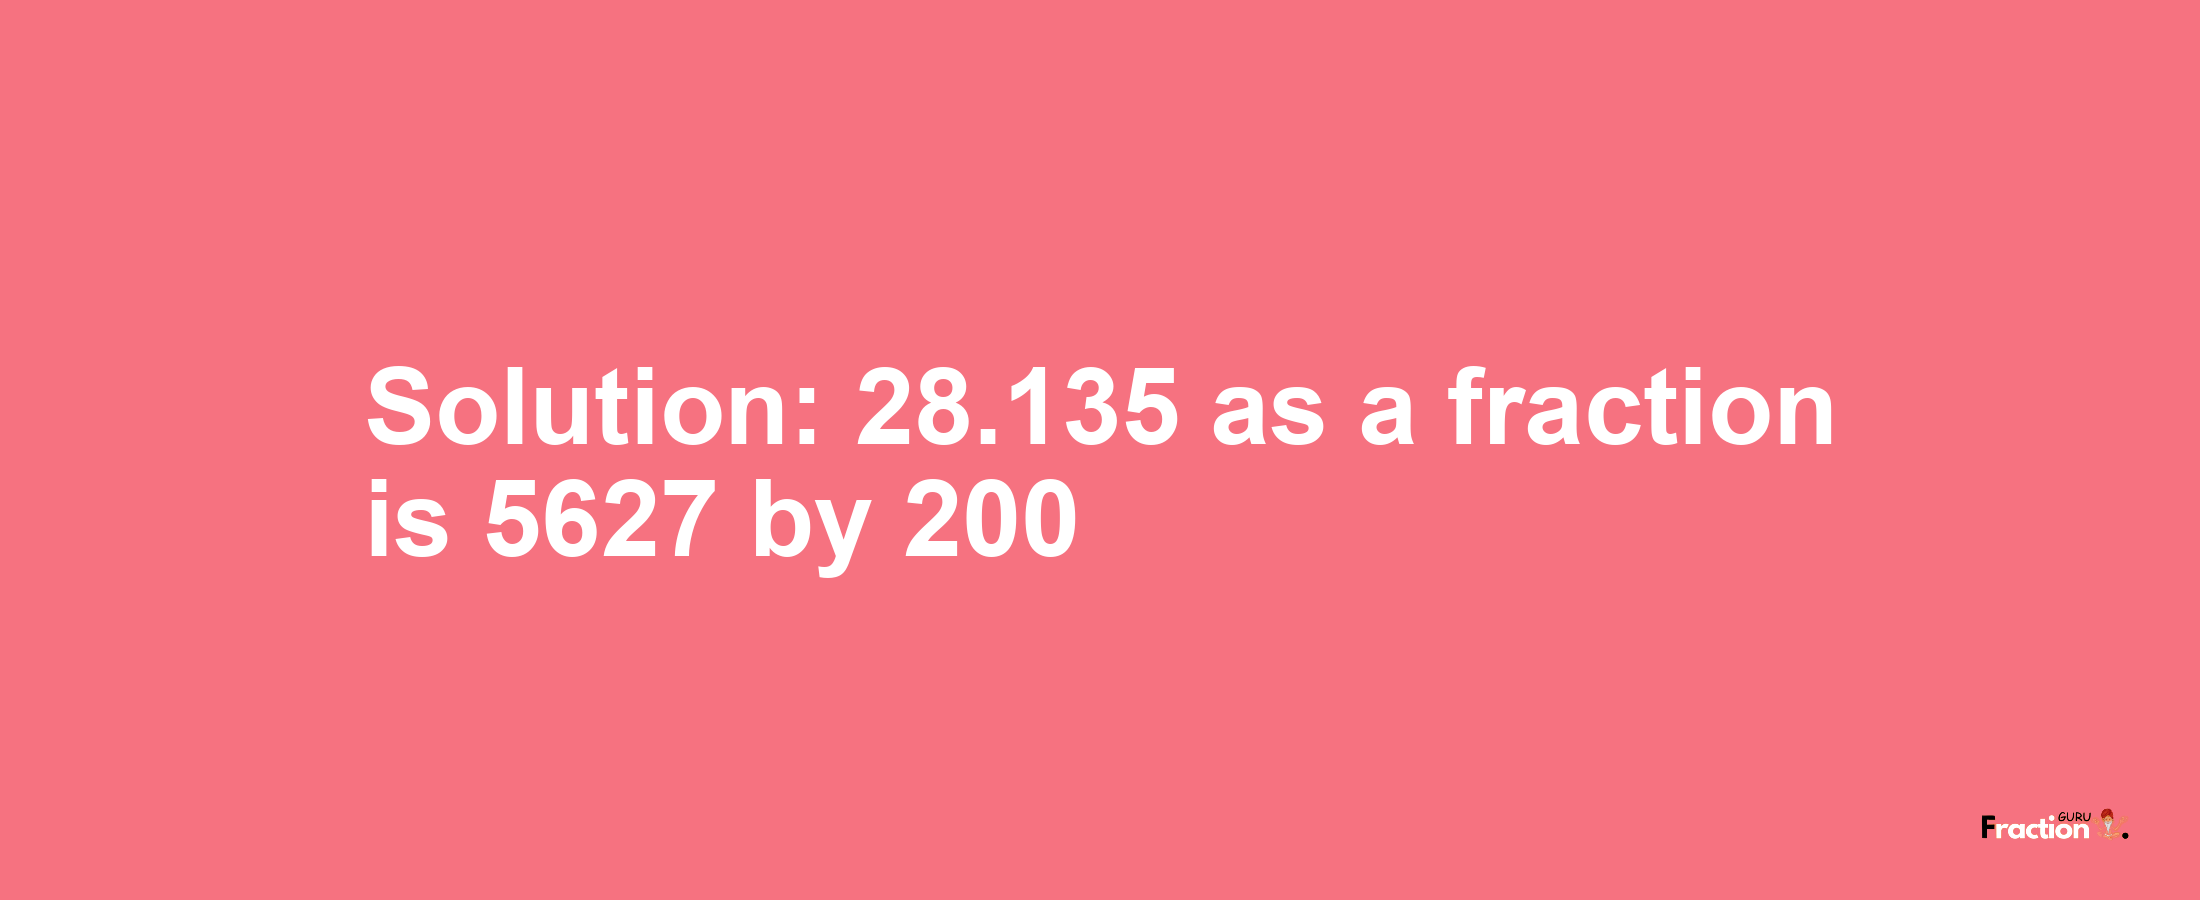 Solution:28.135 as a fraction is 5627/200